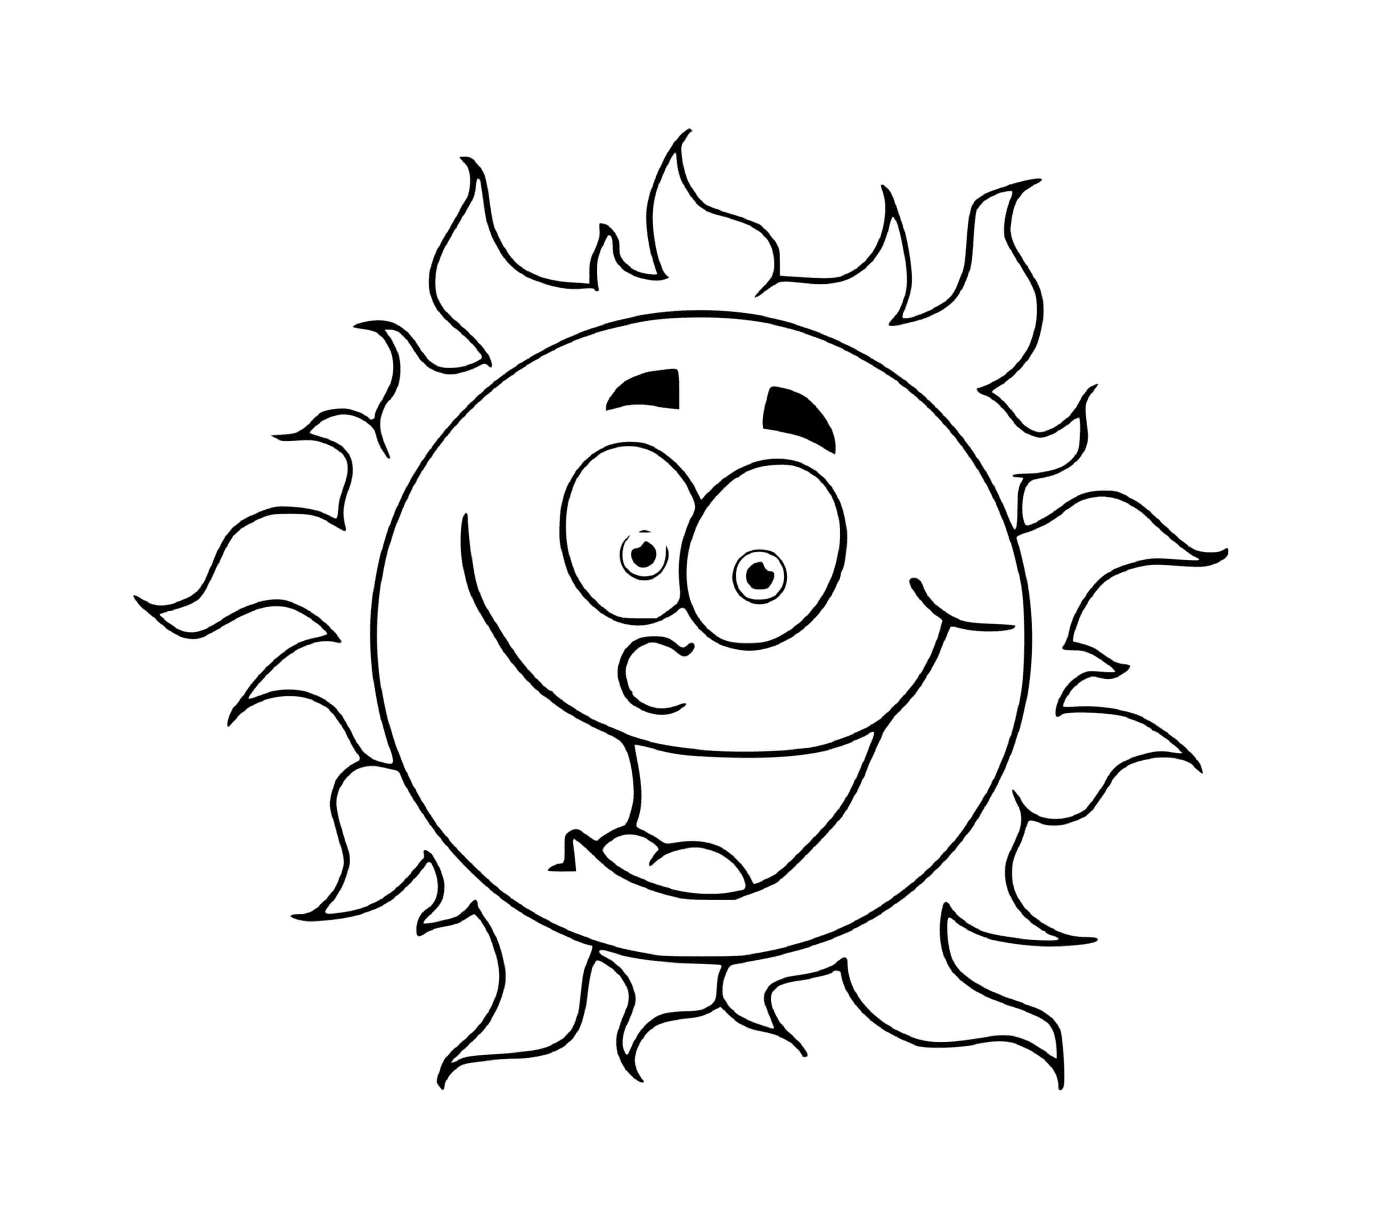 Sun Coloring Pages: 25 Printable Drawings